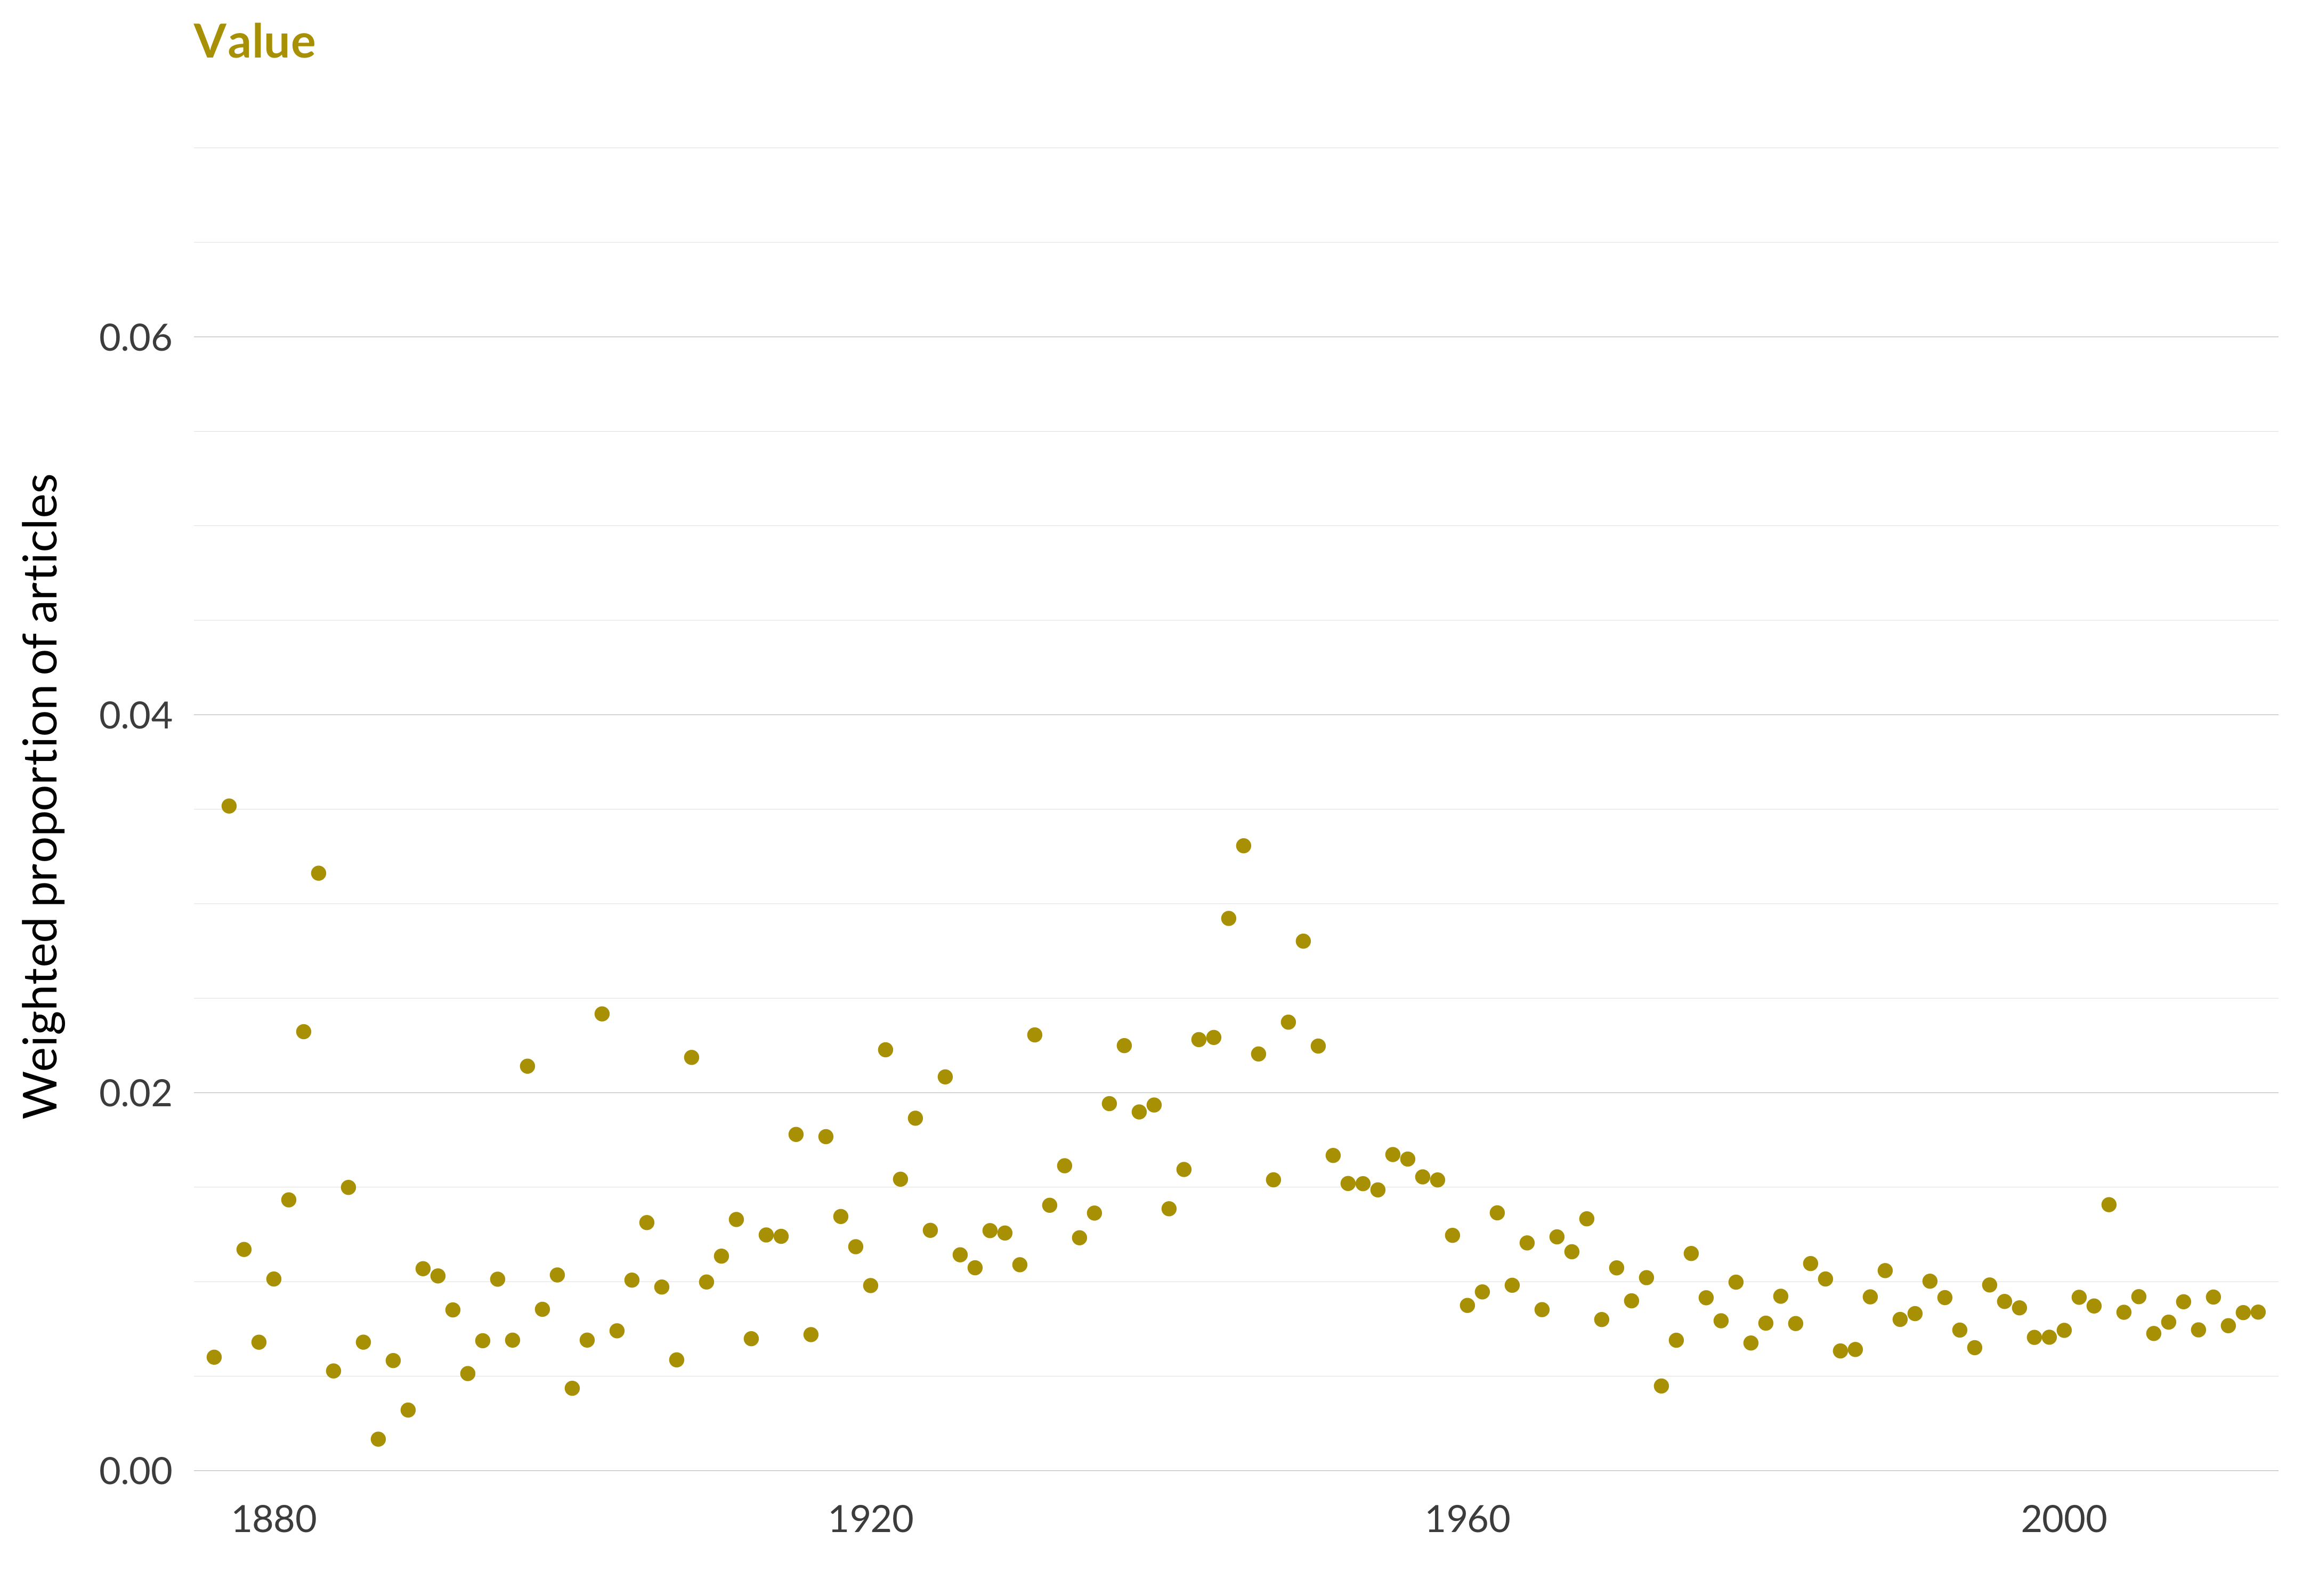 A scatterplot showing which proportion of articles each year are in the valuetopic. The x-axis shows the year, the y-axis measures the proportion of articles each year in this topic. There is one dot per year. The highest value is in 1877 when 3.5% of articles were in this topic. The lowest value is in 1887 when 0.2% of articles were in this topic. The full table that provides the data for this graph is available in Table A.16 in Appendix A.